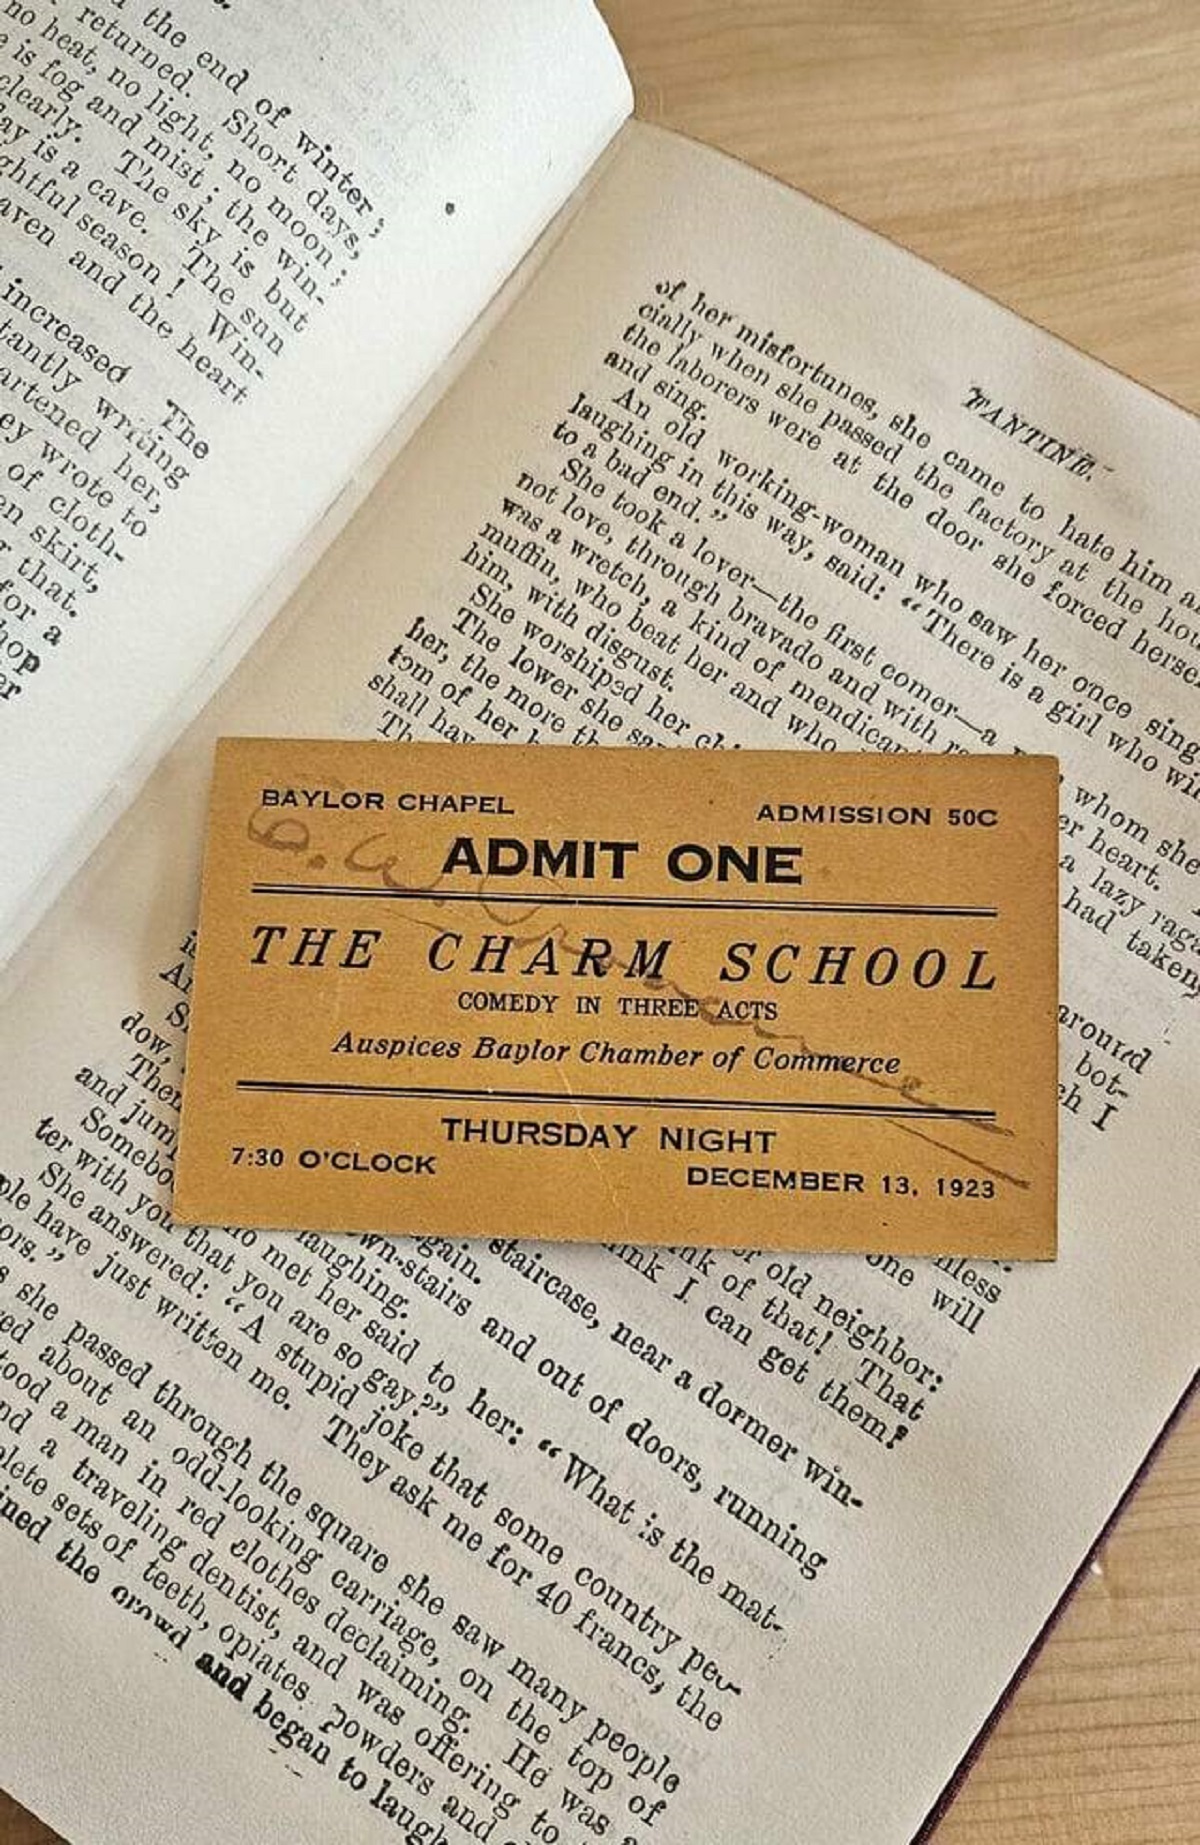 "The bookmarker I found in my old Les Mis set is over 100 years old"